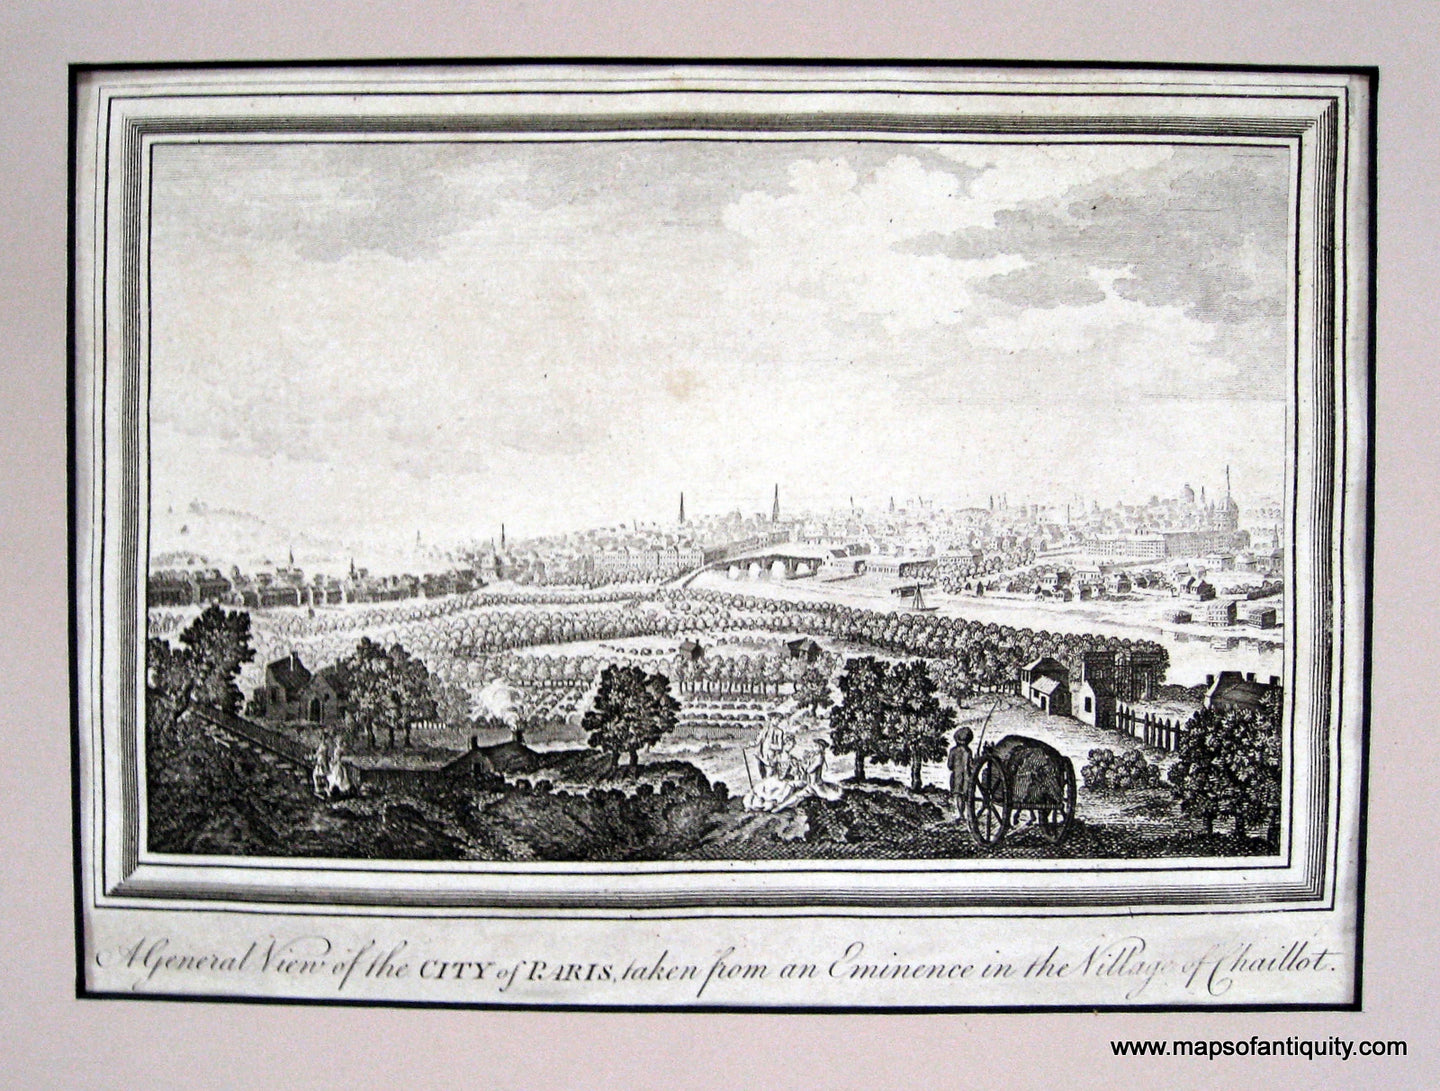 Black-and-White-Engraved-Antique-City-View-A-General-View-of-the-City-of-Paris-France-Paris-1792-Baldwyn-Maps-Of-Antiquity